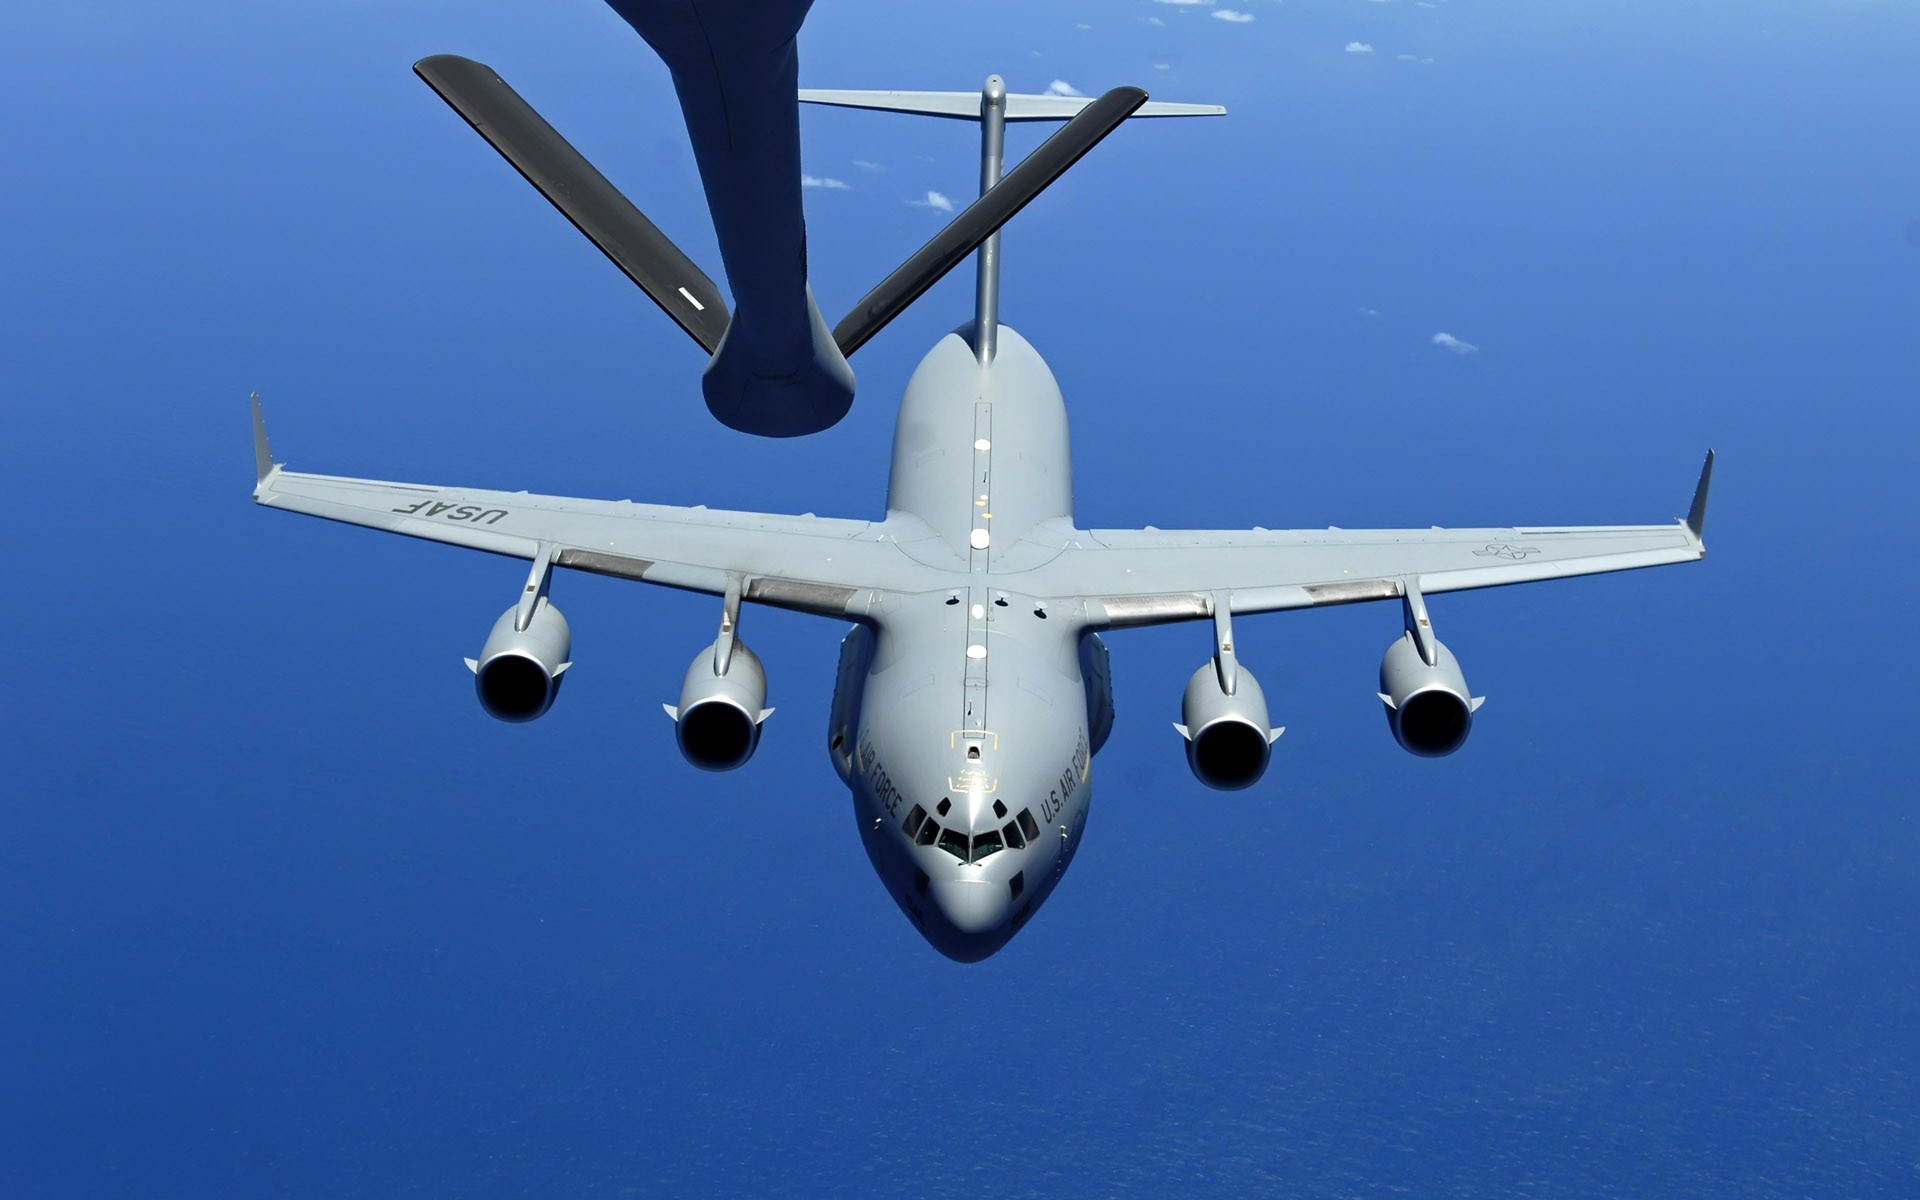 General 1920x1200 airplane military aircraft Boeing C-17 Globemaster III mid-air refueling Boeing American aircraft aircraft US Air Force water